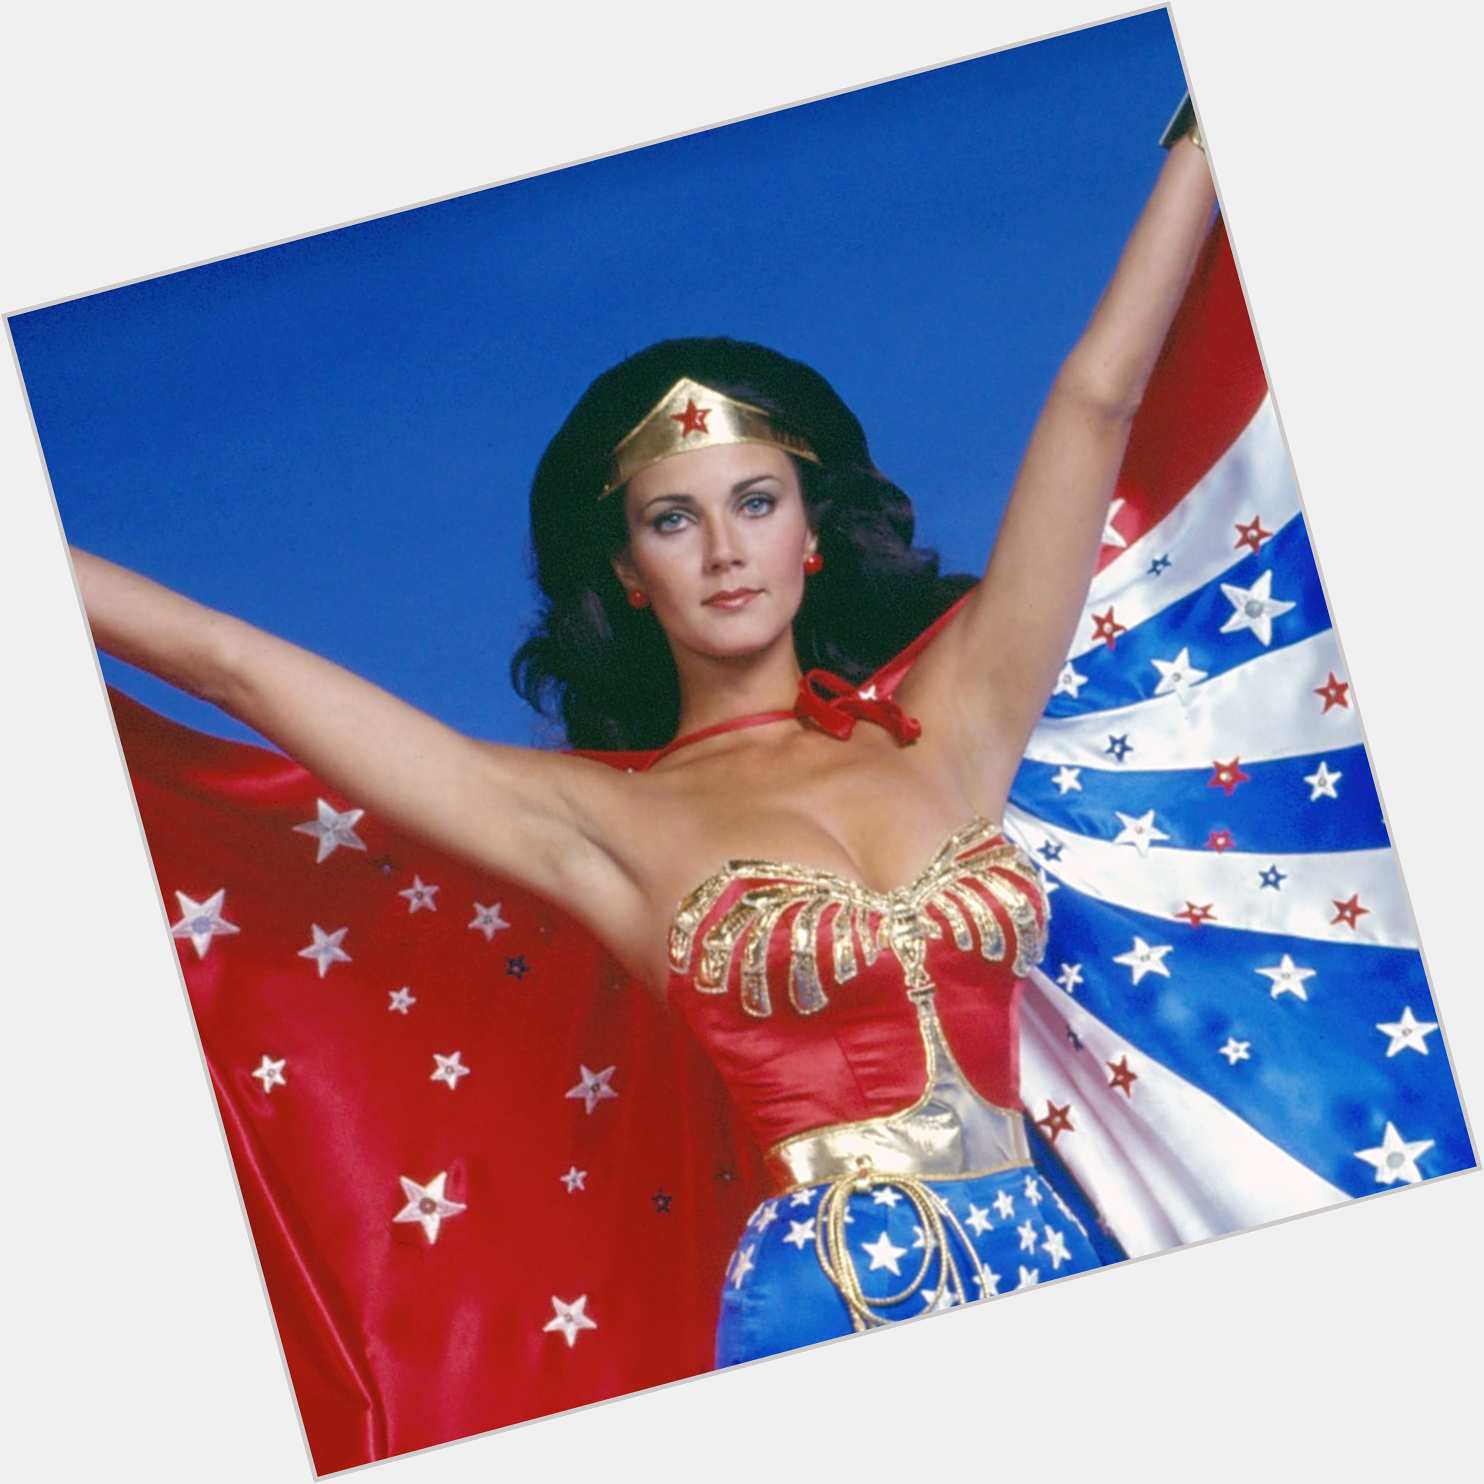 A Most Happy Birthday to the one and only Wonder Woman Lynda Carter. 